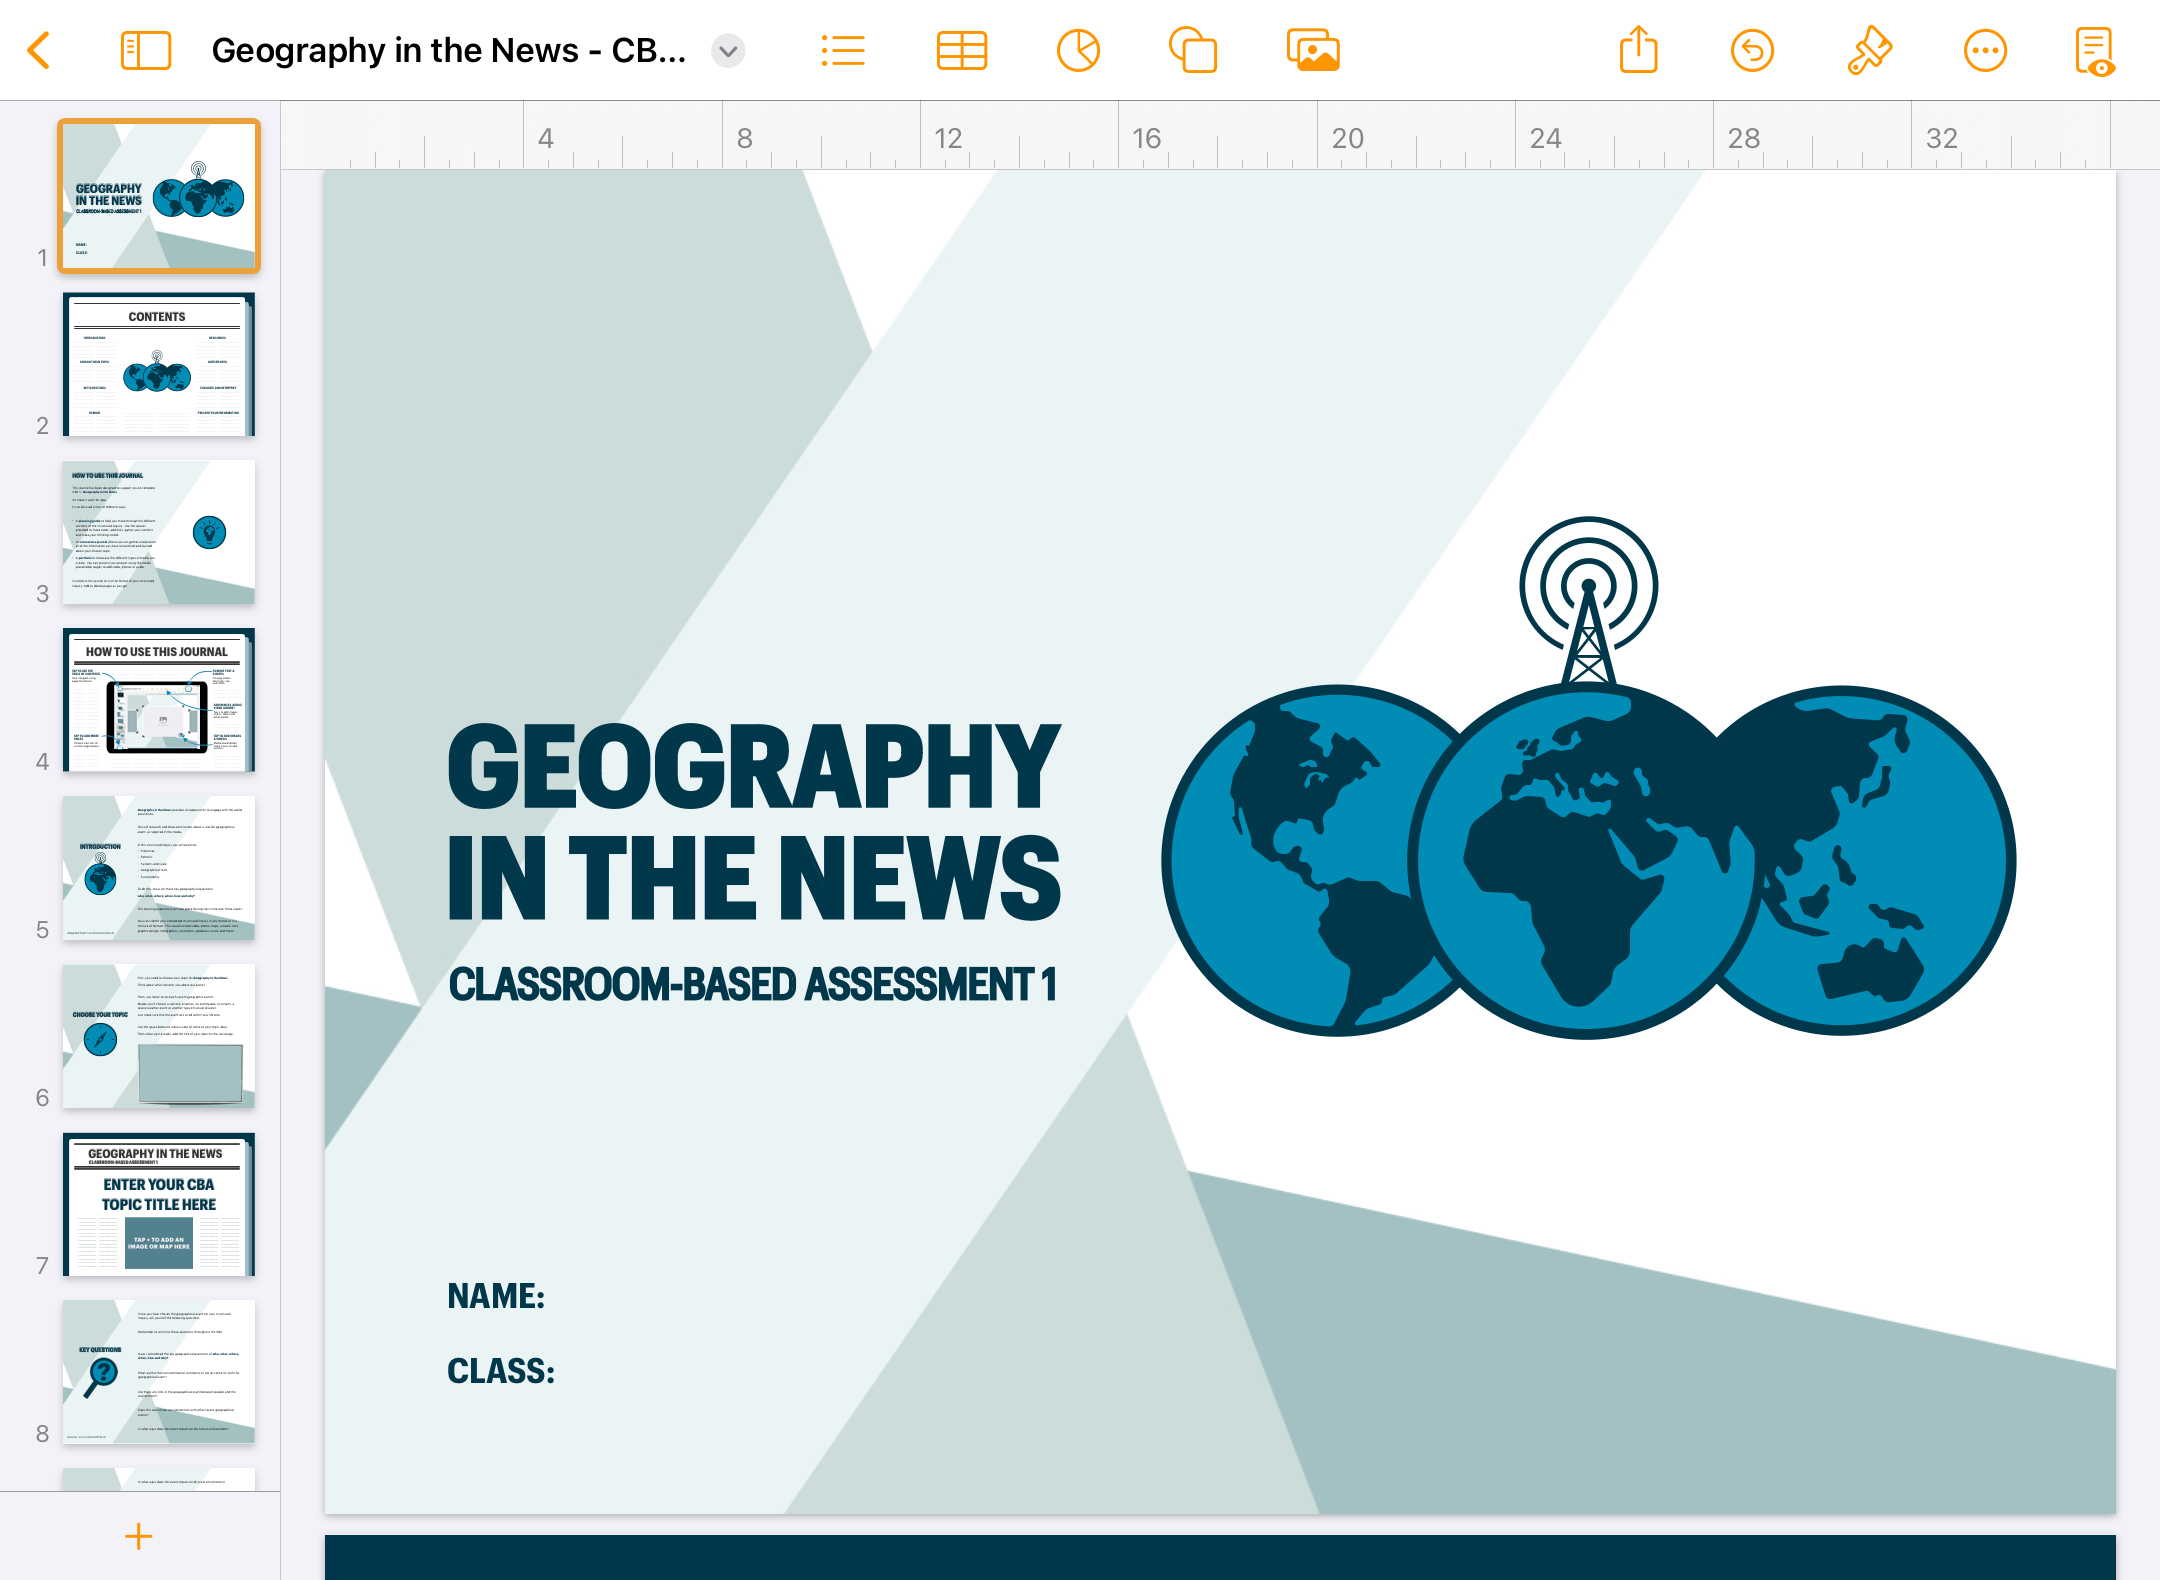 Cover page of ‘Geography in the News’ Pages journal, with title text and a globe image.